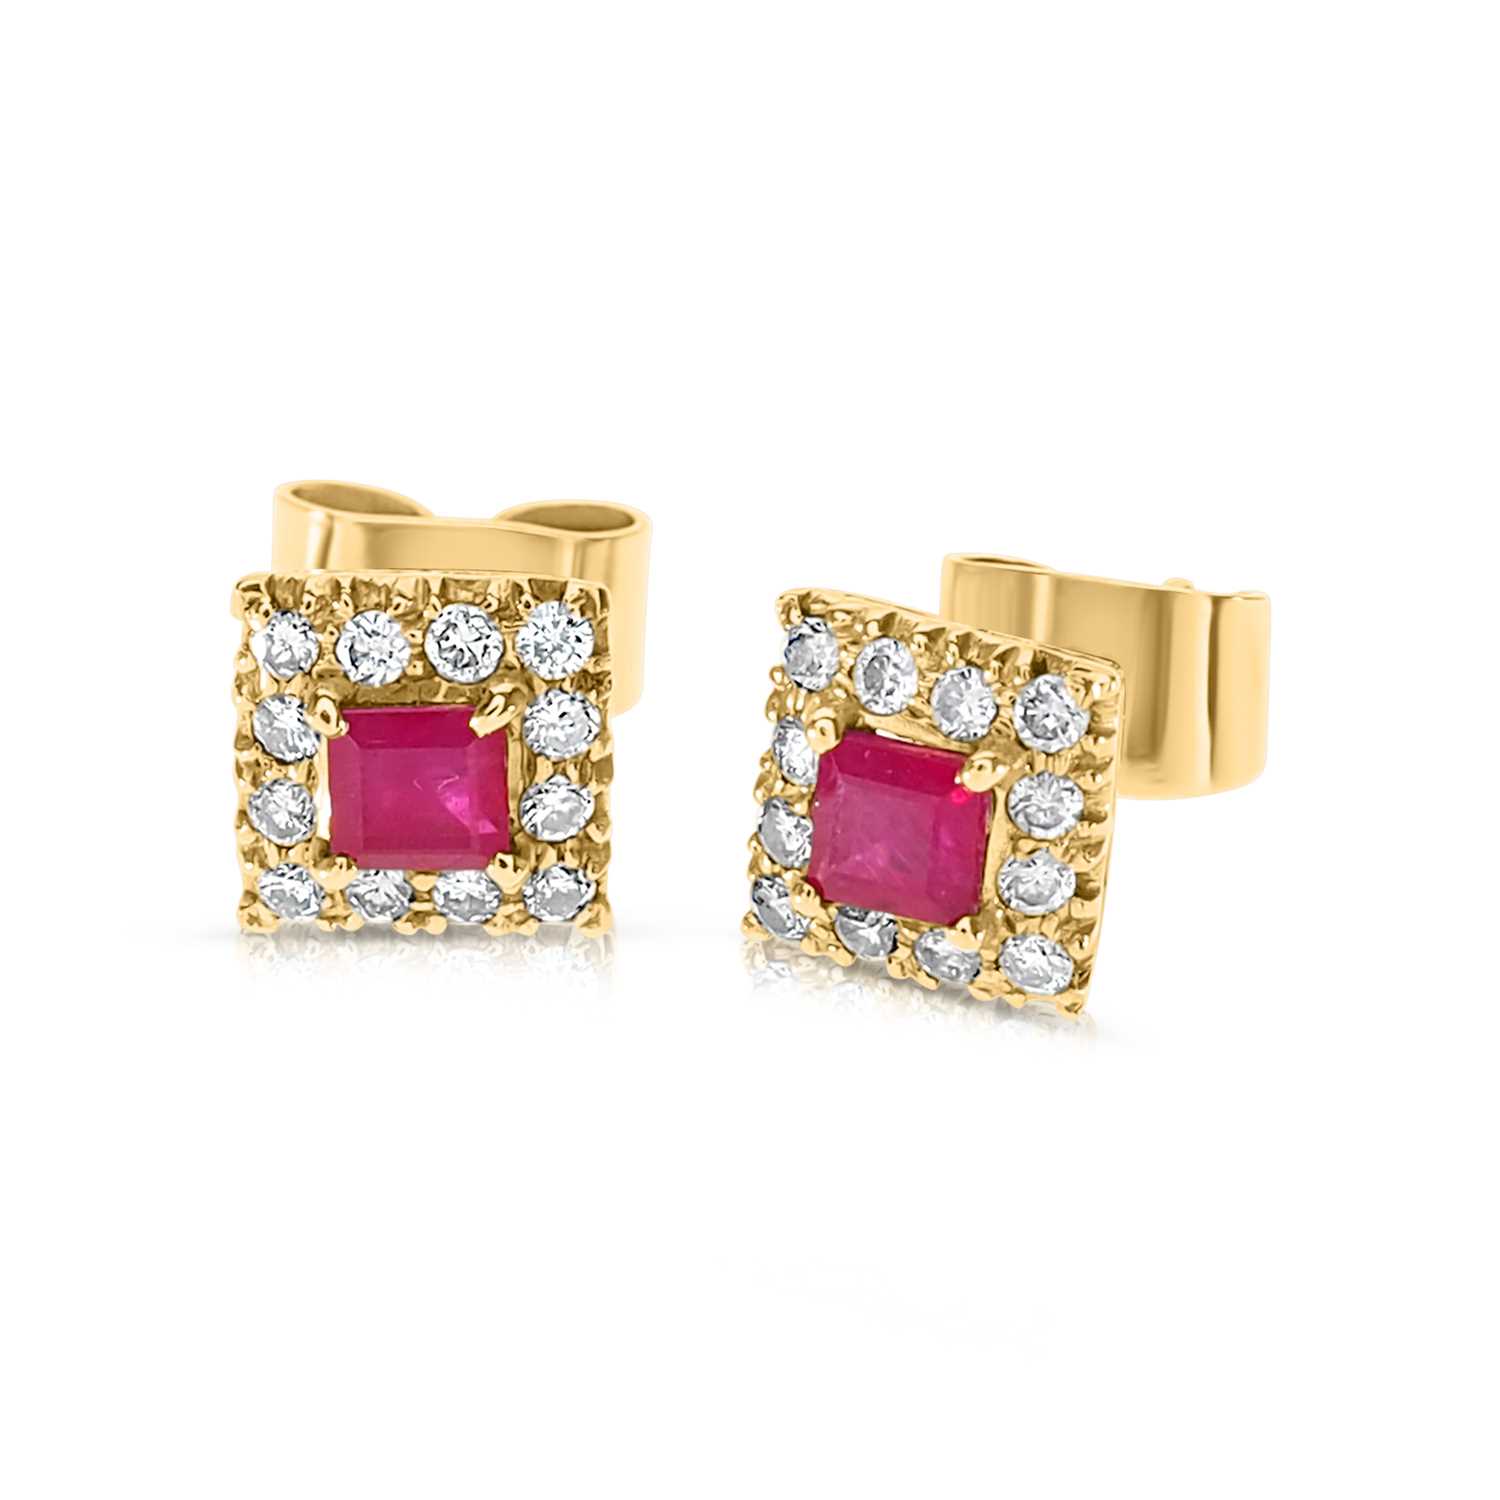 Lot 559 - Pair of 18K Gold, Ruby and Diamond Ear Studs